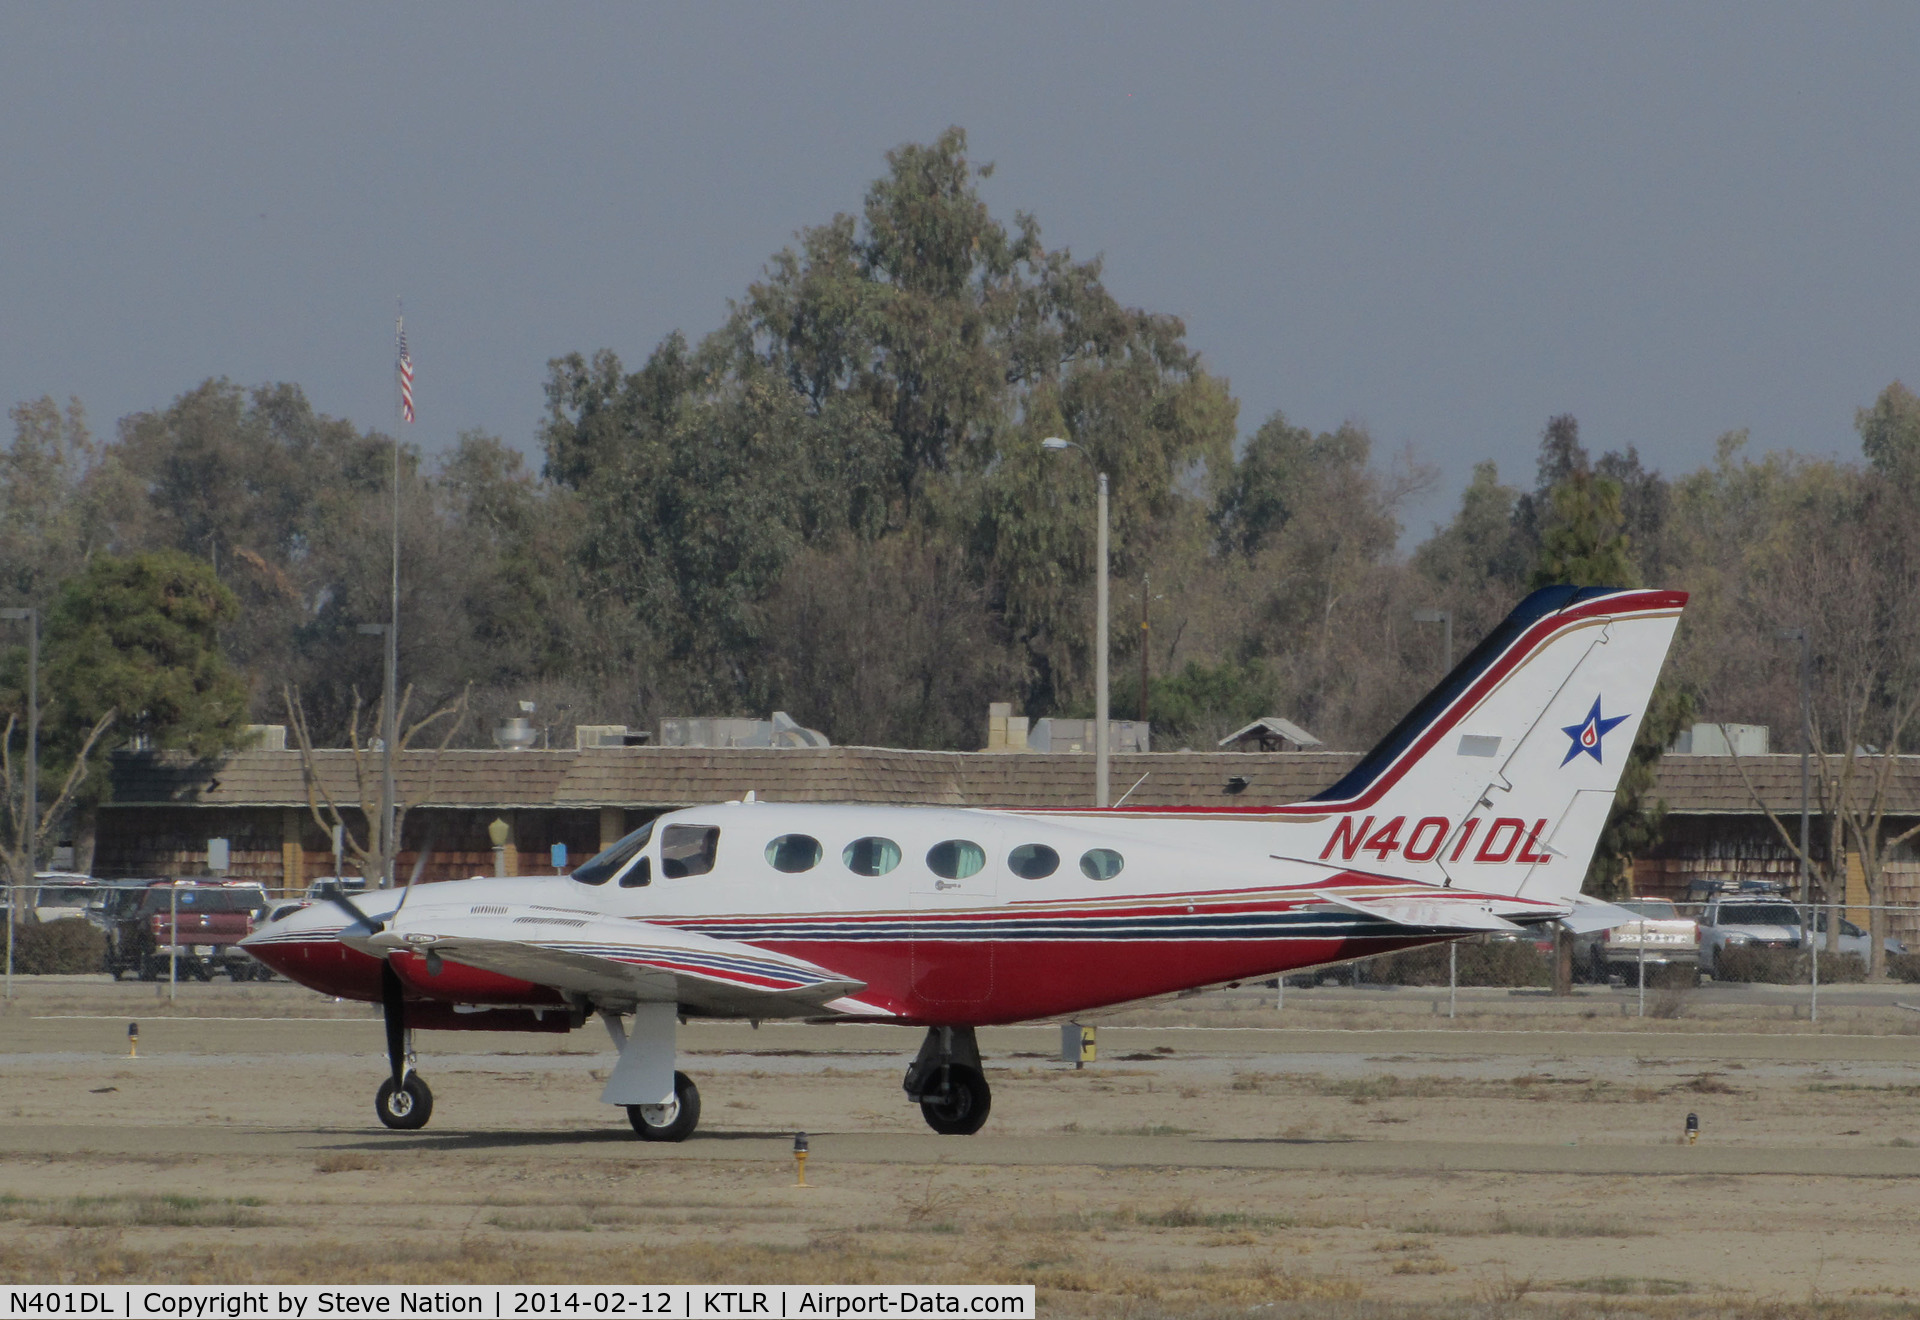 N401DL, 1979 Cessna 421C Golden Eagle C/N 421C0813, Blue Star Gas Fleet Services (Central Point, OR) Cessna 421C taxis in @ Mefford Field (Tulare, CA) for 2014 International Ag Expo